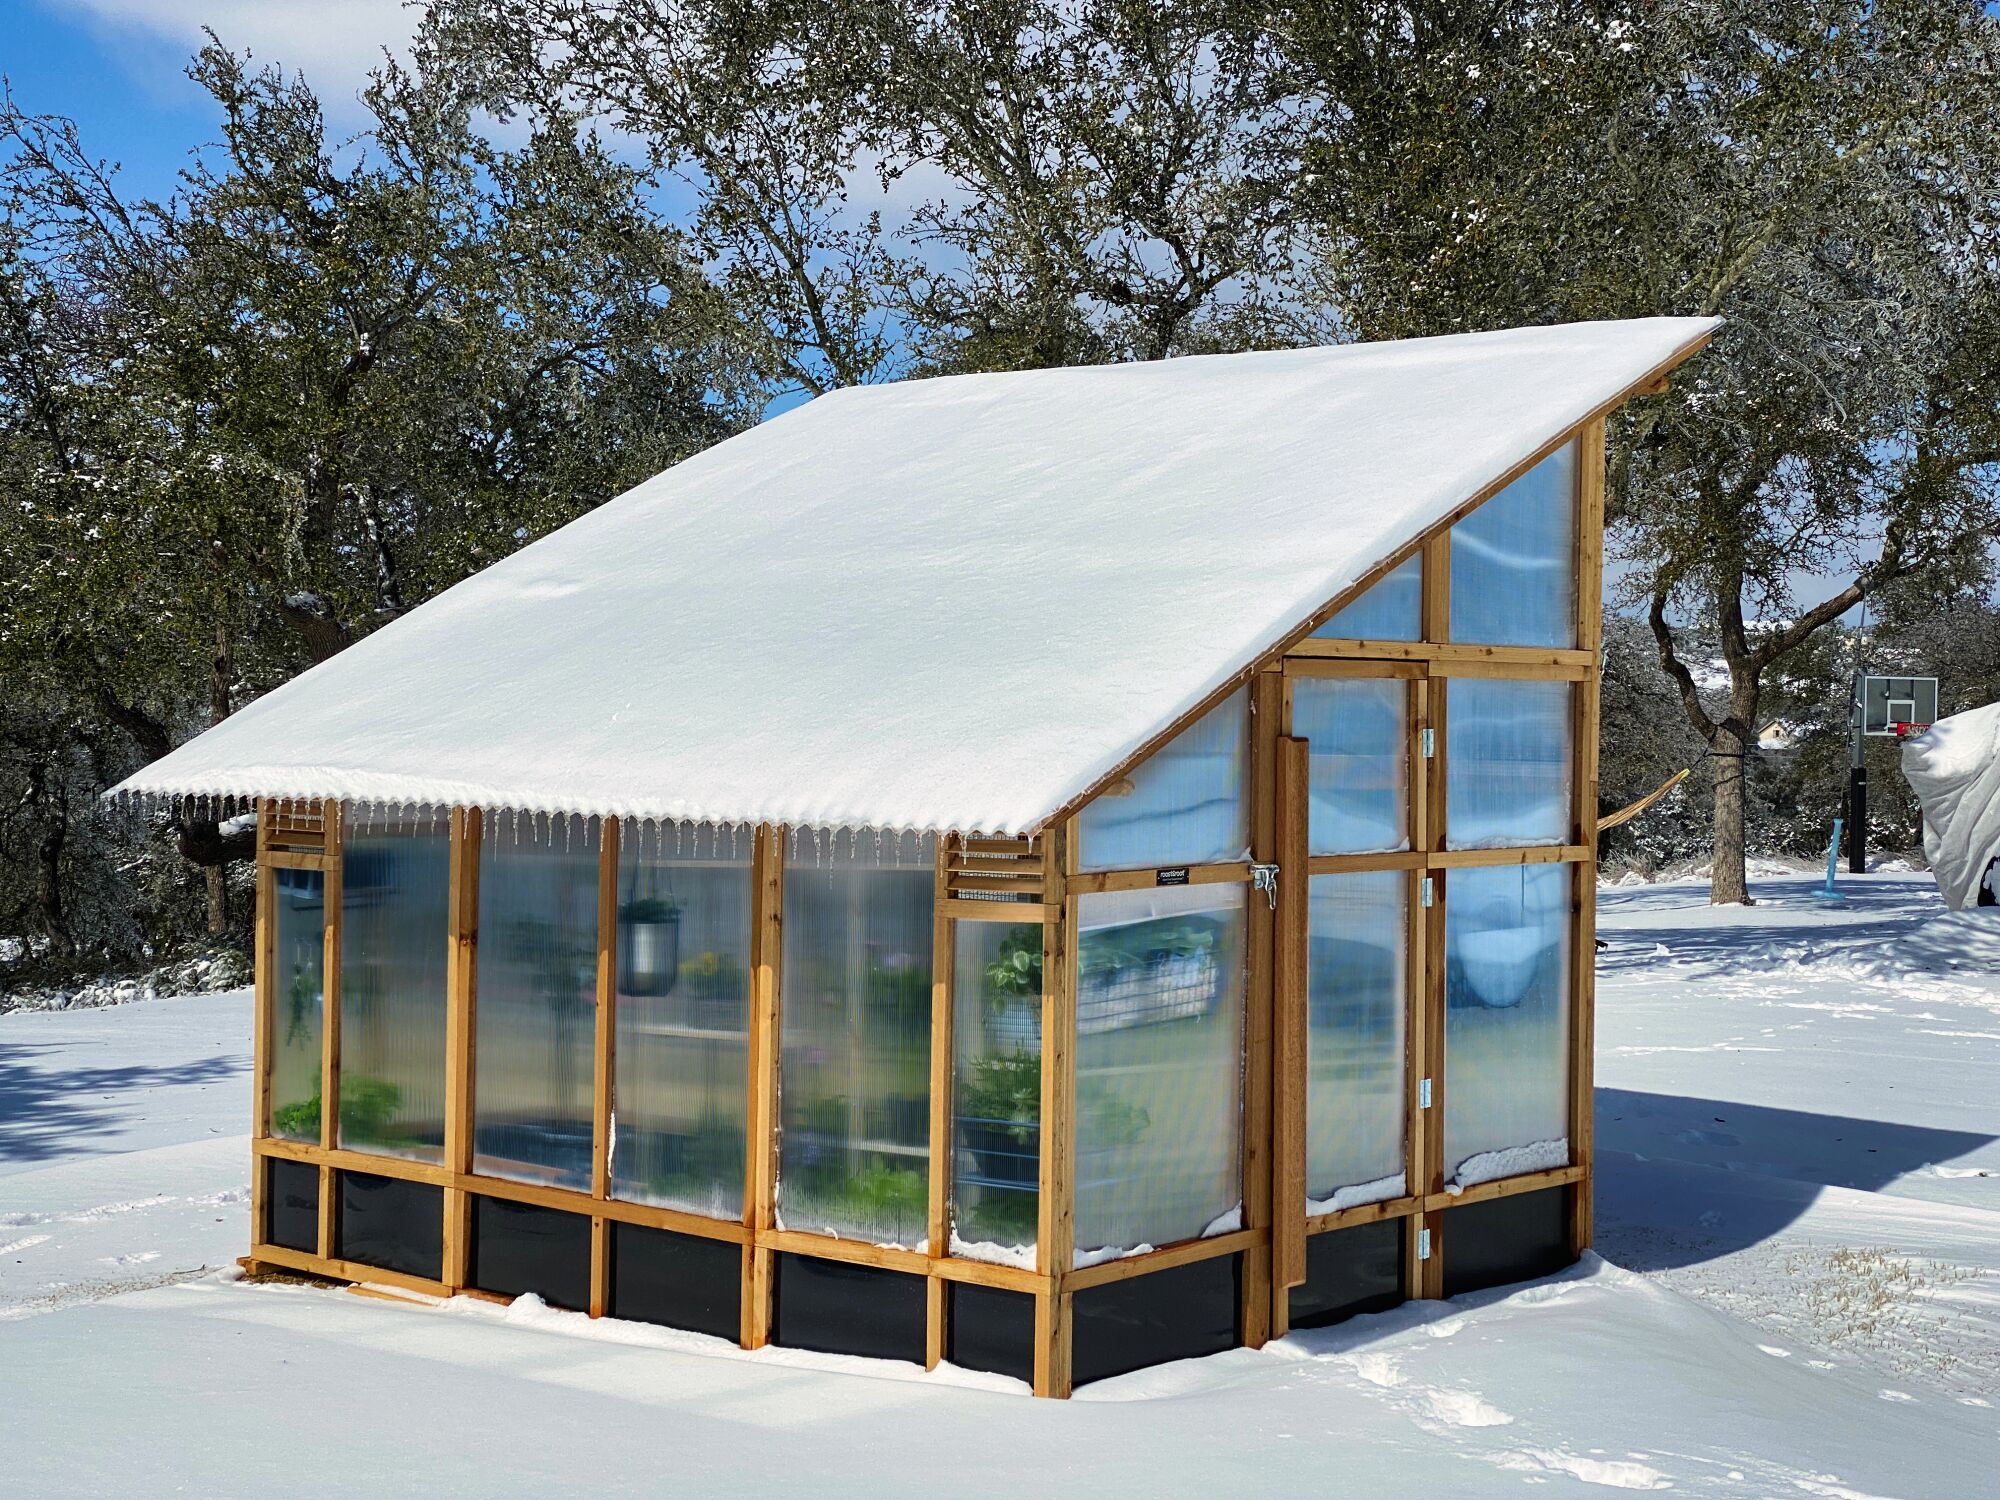 Slant-Roof Greenhouse in the Snow